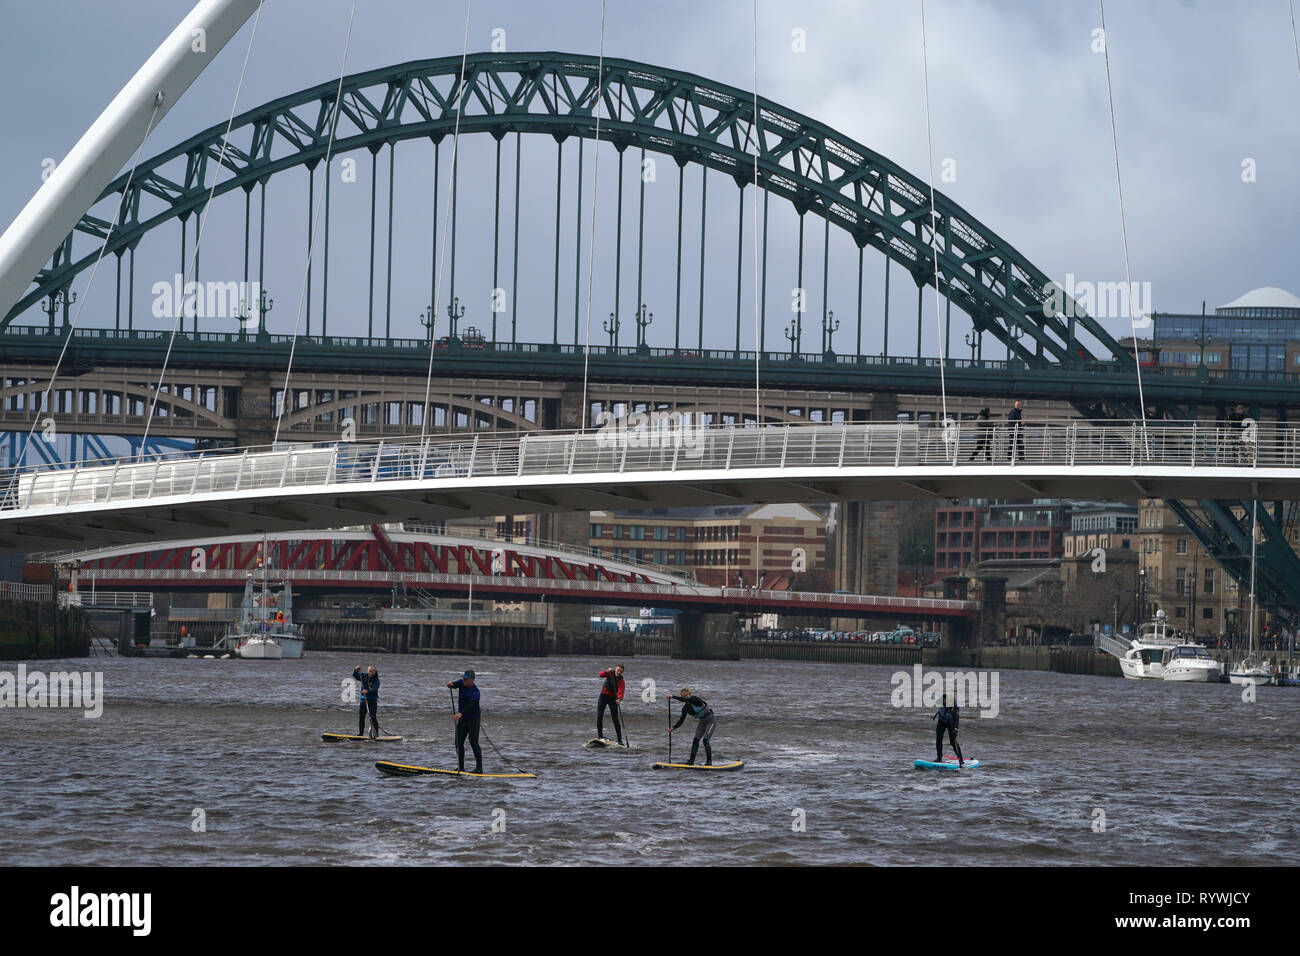 Paddle boarders pass under the Gateshead Millennium Bridge spanning the River Tyne in Newcastle upon Tyne. Stock Photo